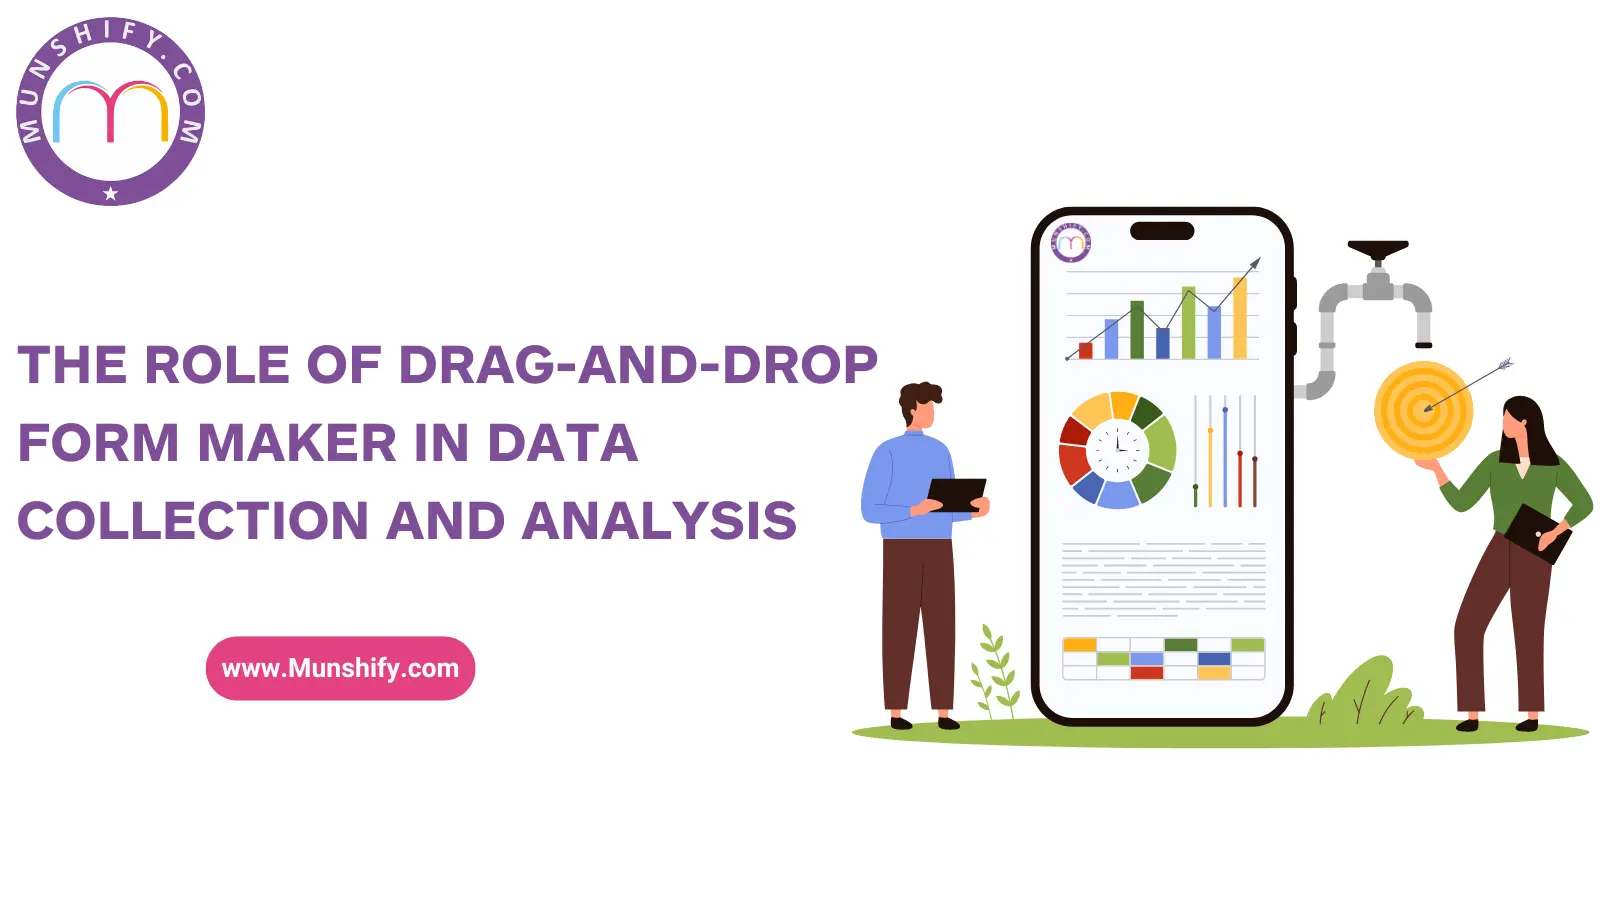 The Role of Drag-and-Drop Form Maker in Data Collection and Analysis